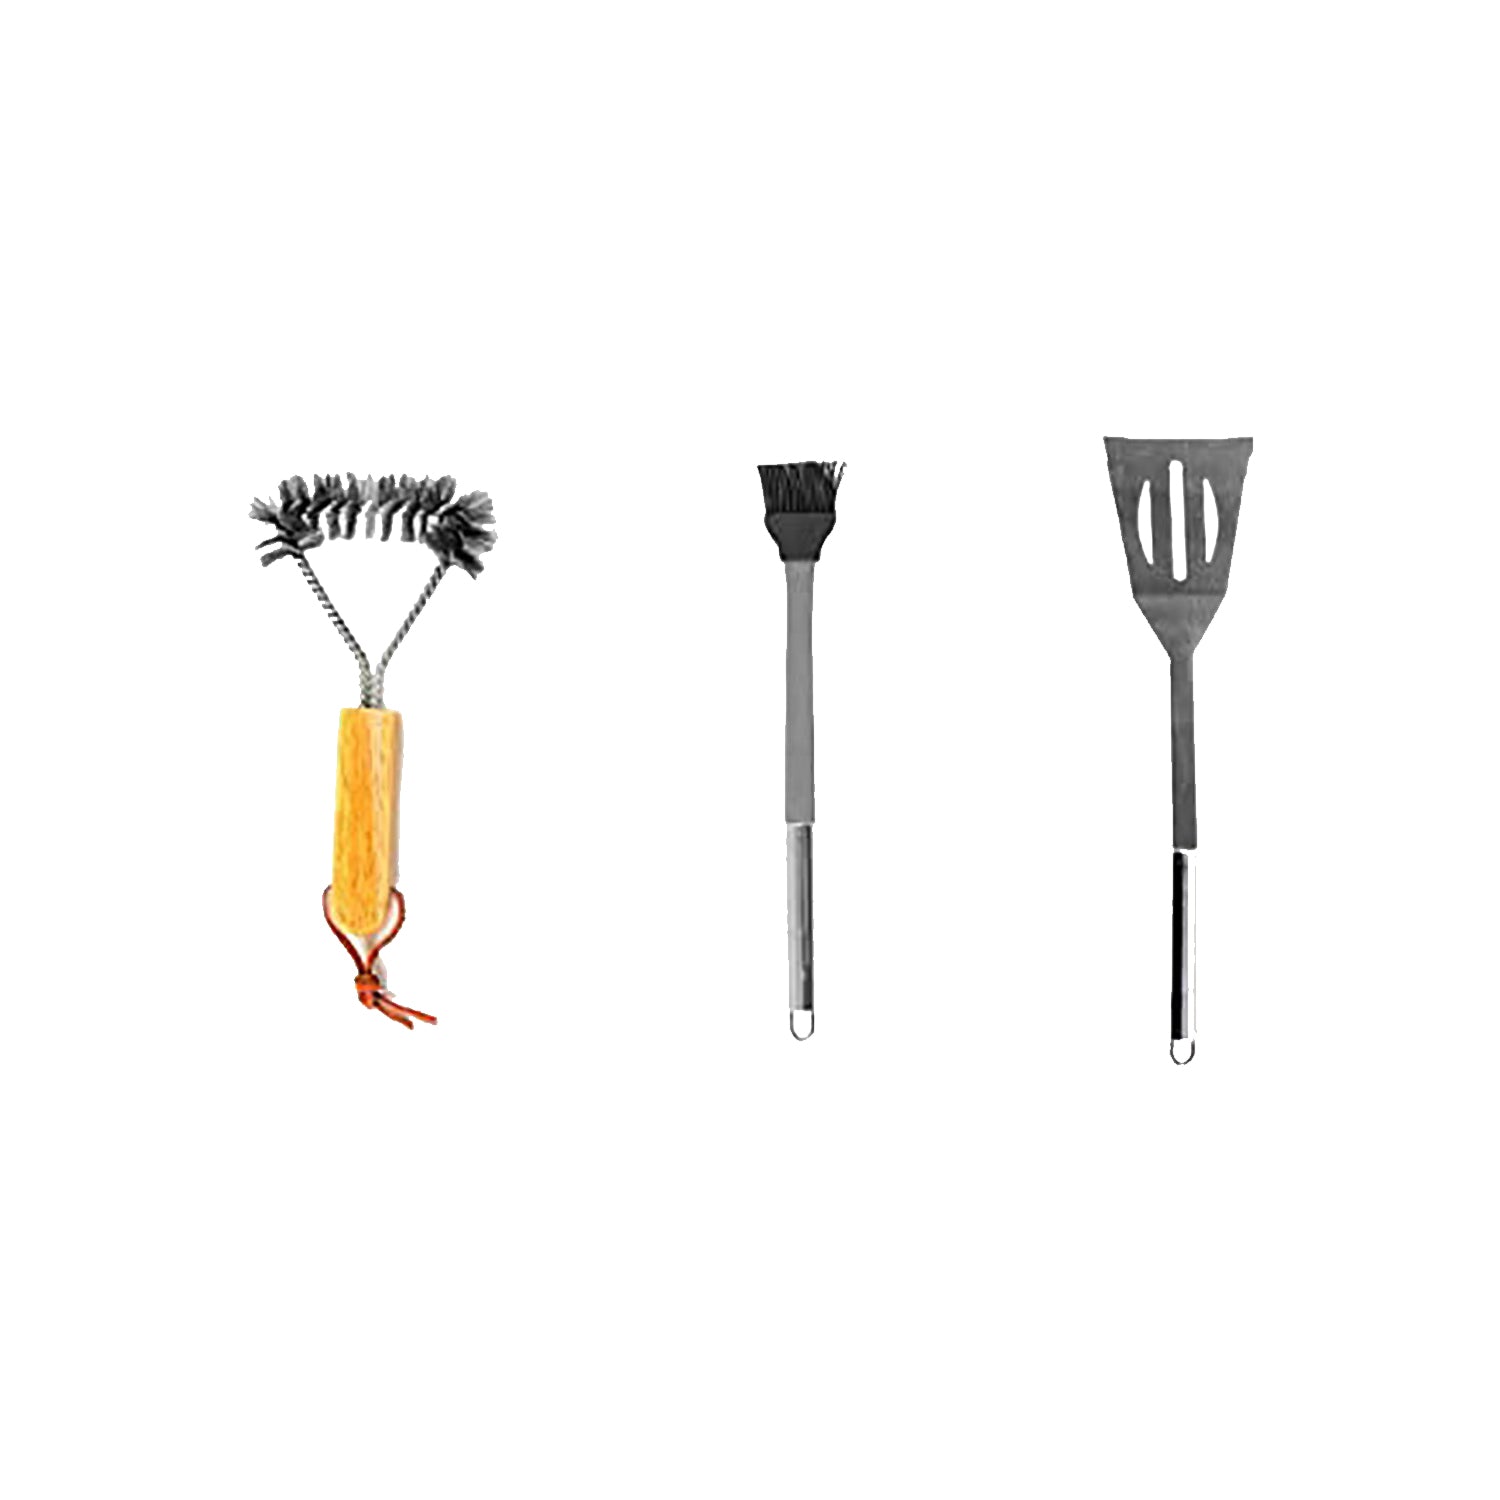 Barbeque Grill Cooking Kit, Set of 3 | Barbeque Accessories